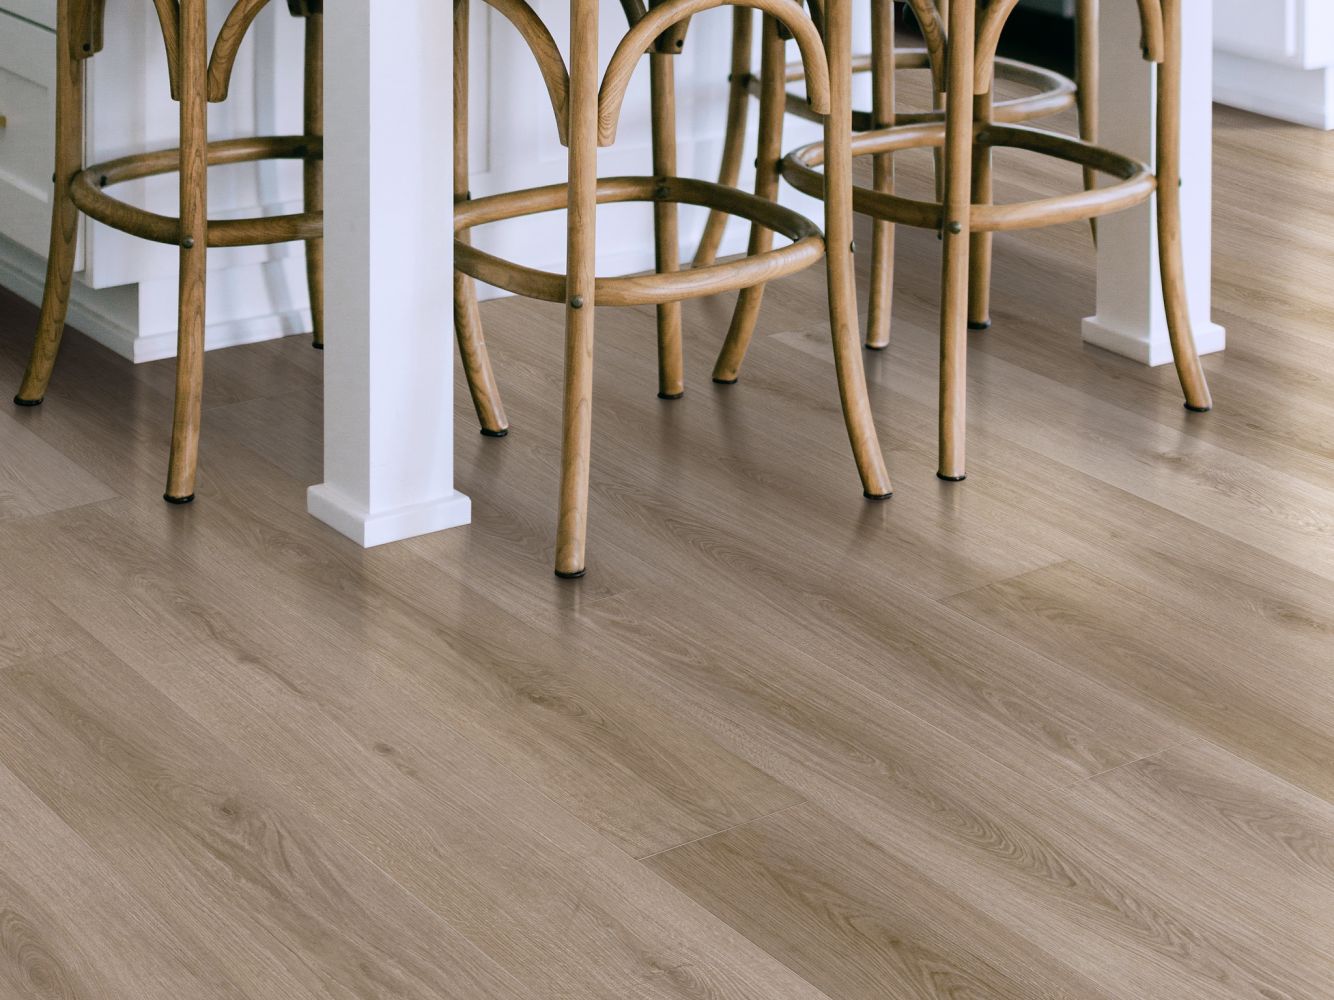 Shaw Floors Resilient Residential Prodigy Hdr Mxl Plus Greyhound 05231_2039V